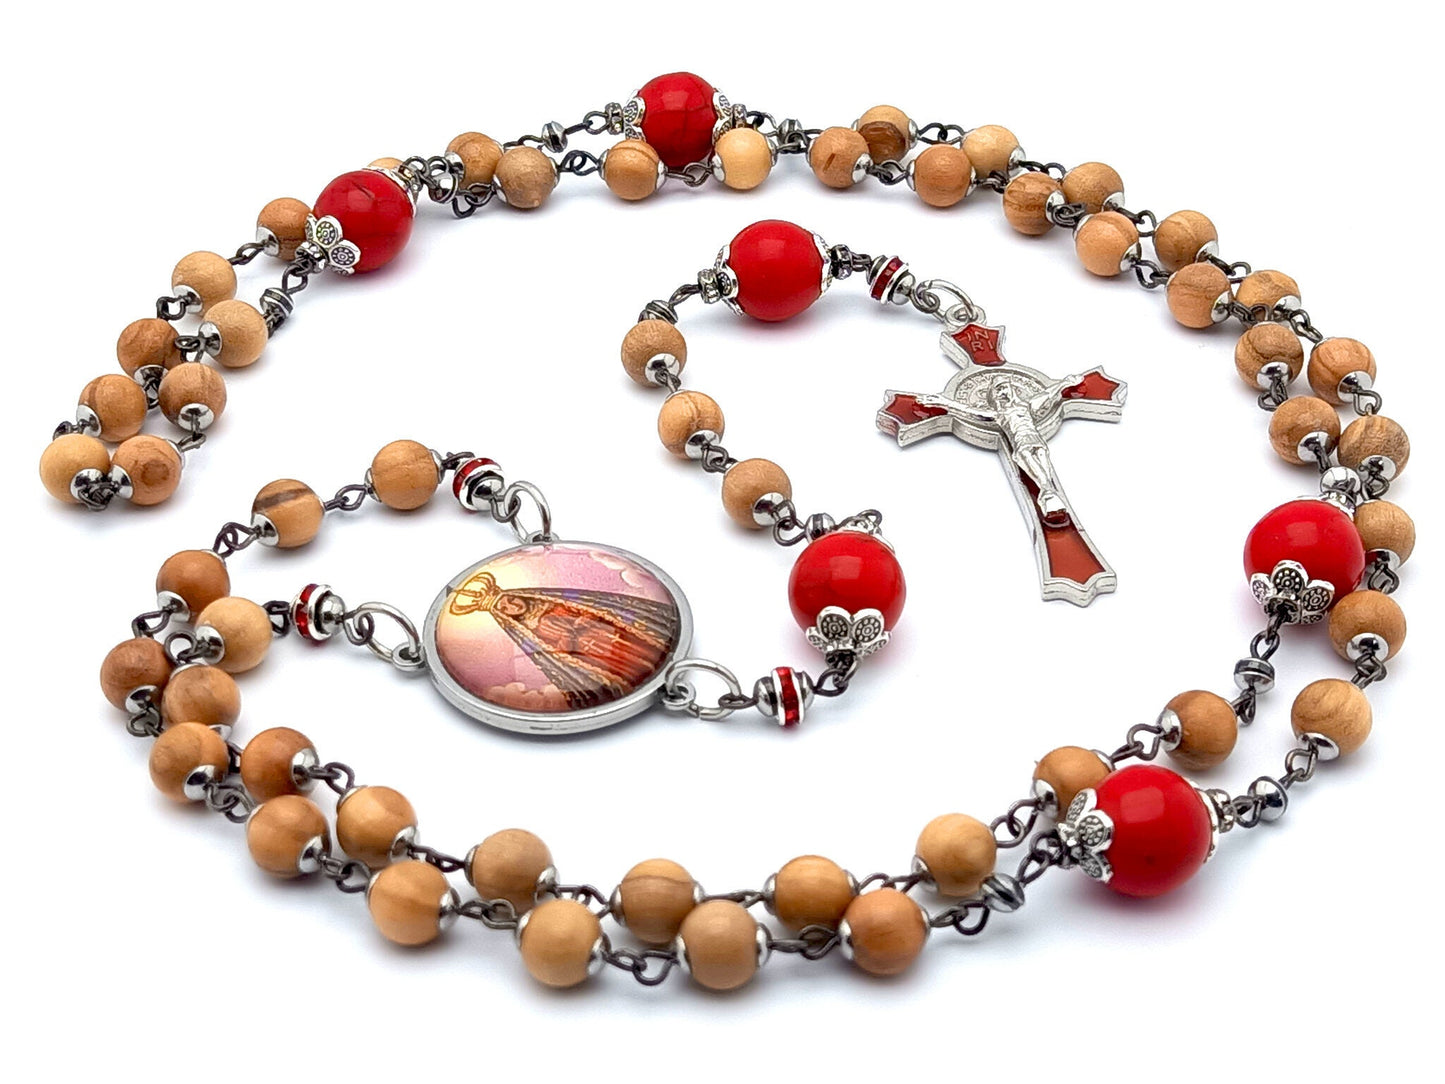 Our Lady of Charity unique rosary beads with wooden and red gemstone beads, red enamel and silver Saint Benedict crucifix and picture centre medal.